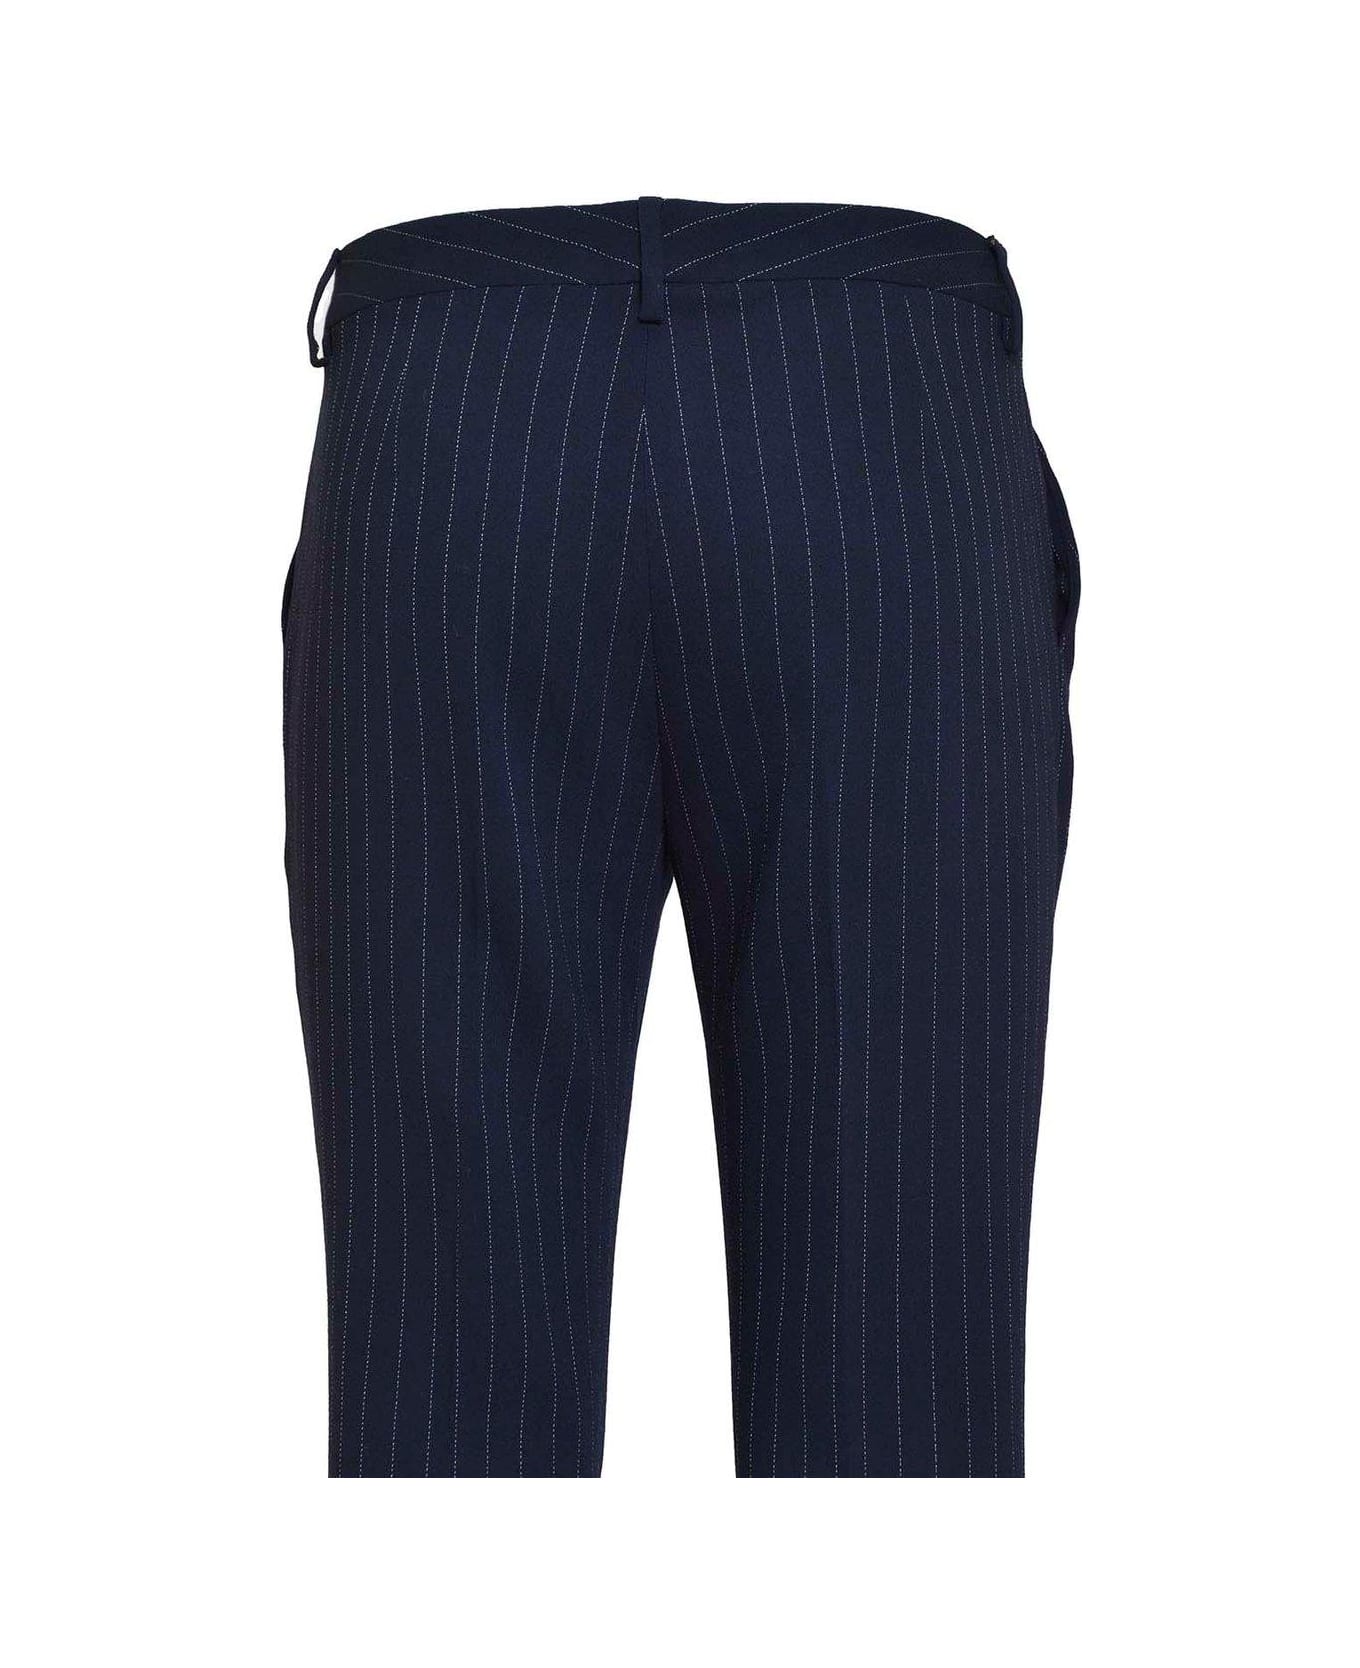 Etro Striped Tailored Trousers - Blu ボトムス